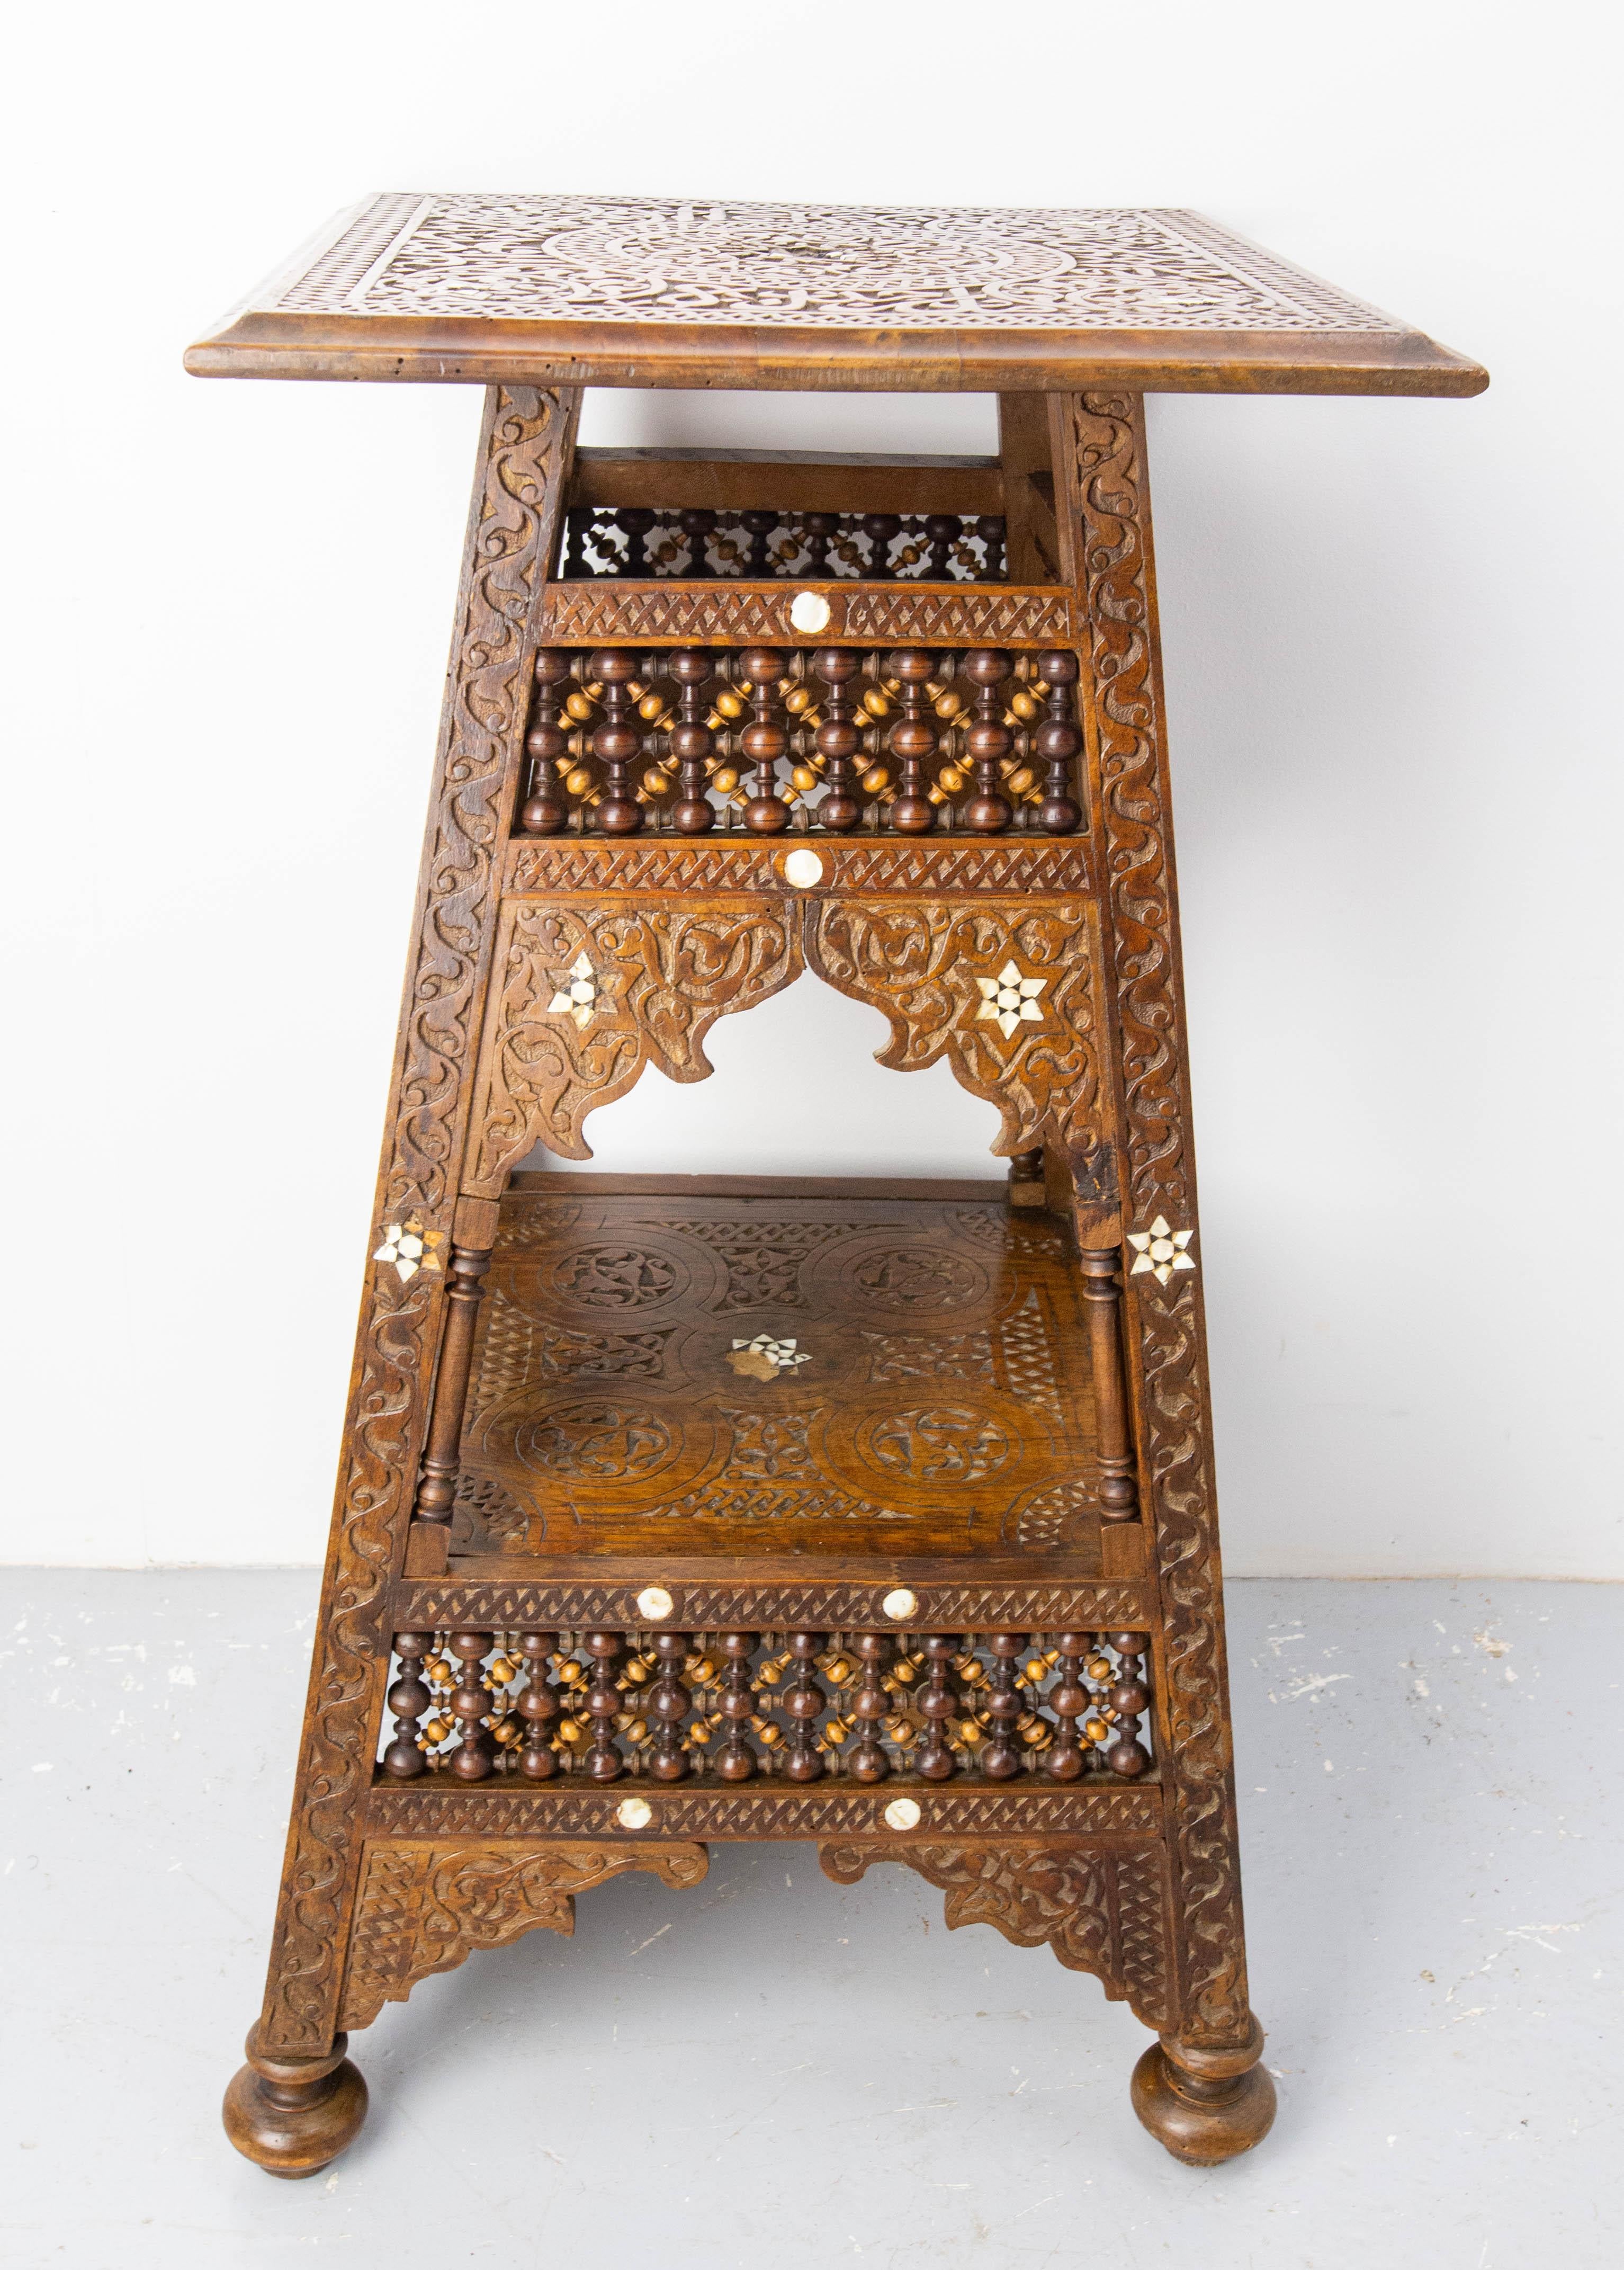 Mid-century Thuya sellette or pedestal table made in Syrian.
Made circa 1900 with bicolored wood and incrustions.
Decoration of the top tray with Arabic letters
Good condition, some of the incrutations are missing.

Shipping:
49 / 49 / 84 cm 9.5 Kg